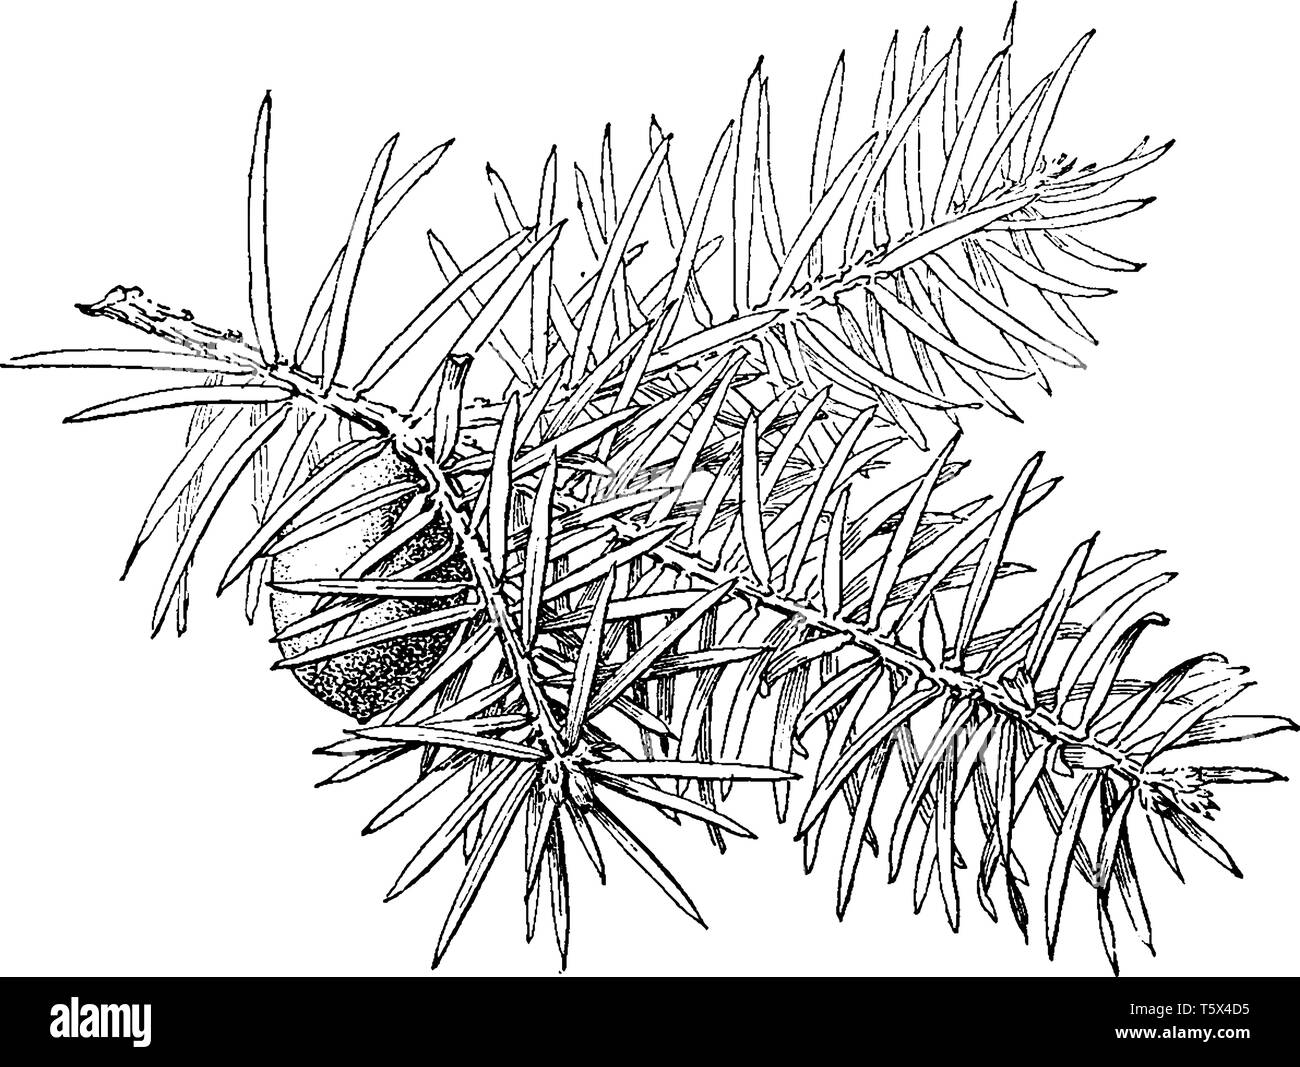 A picture of Torreya Taxifolia tree which is bearing glossy leaves and rarely seen in Florida, vintage line drawing or engraving illustration. Stock Vector